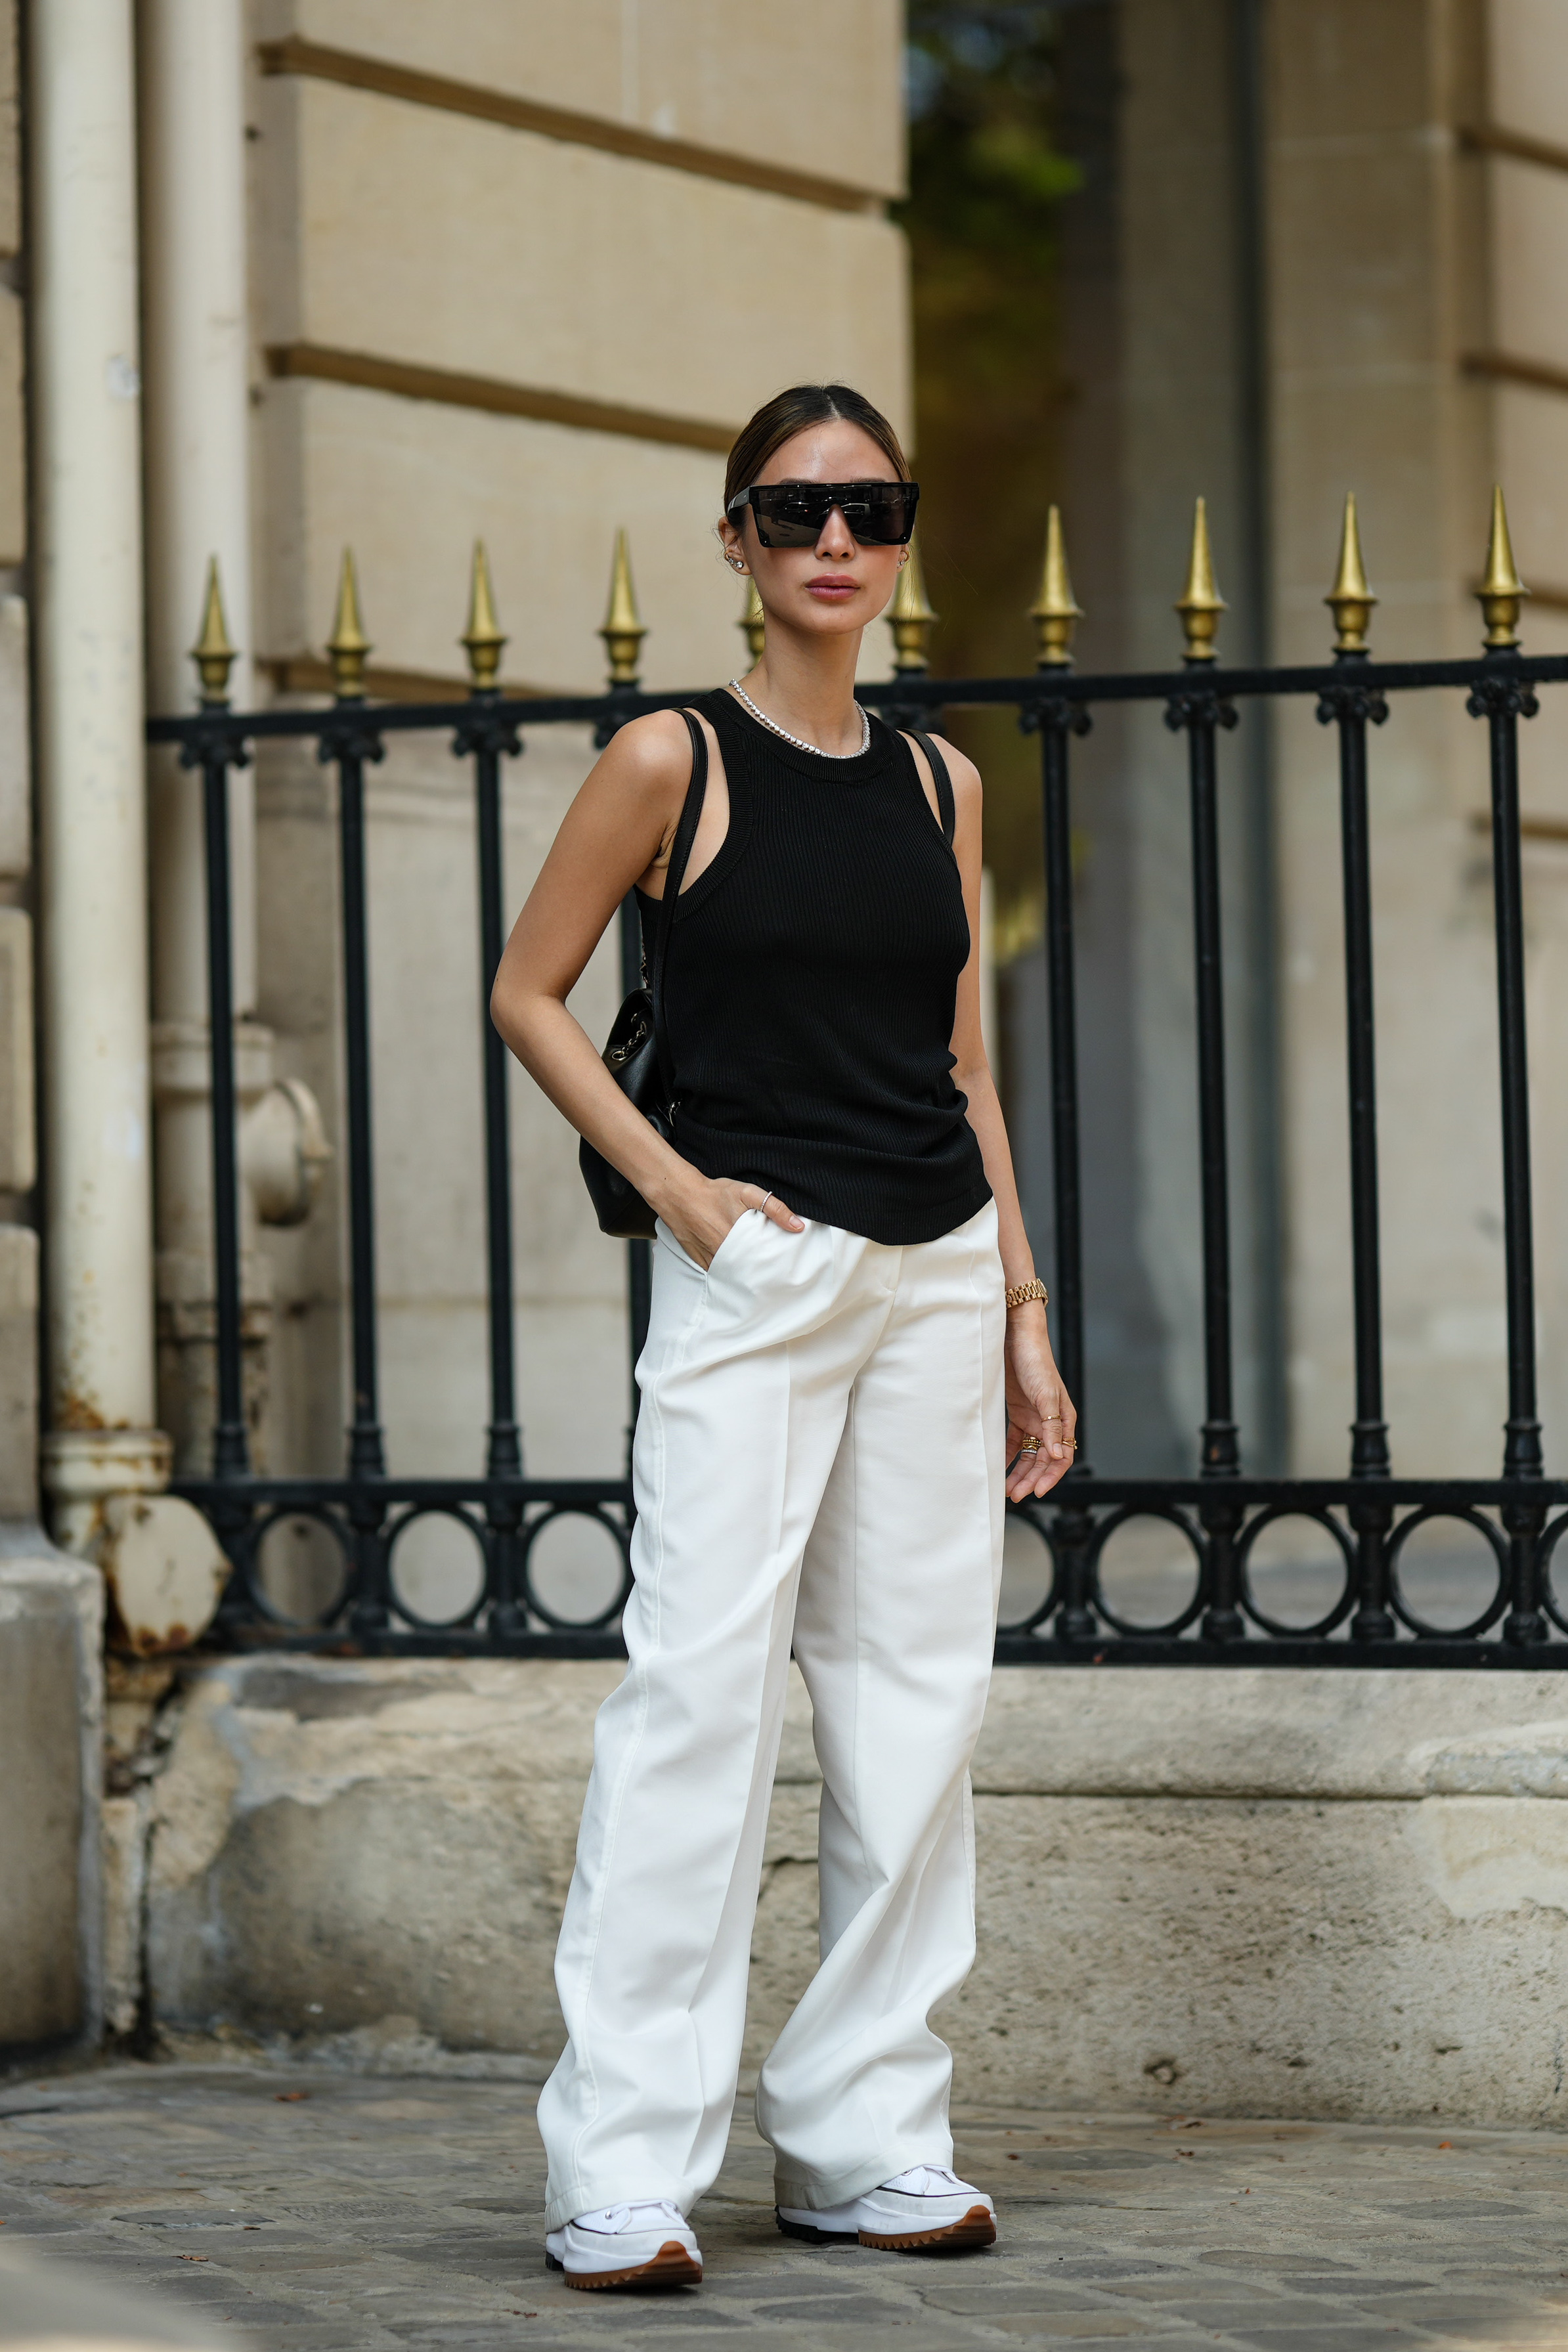 woman wearing black tank top, white pants, and white sneakers